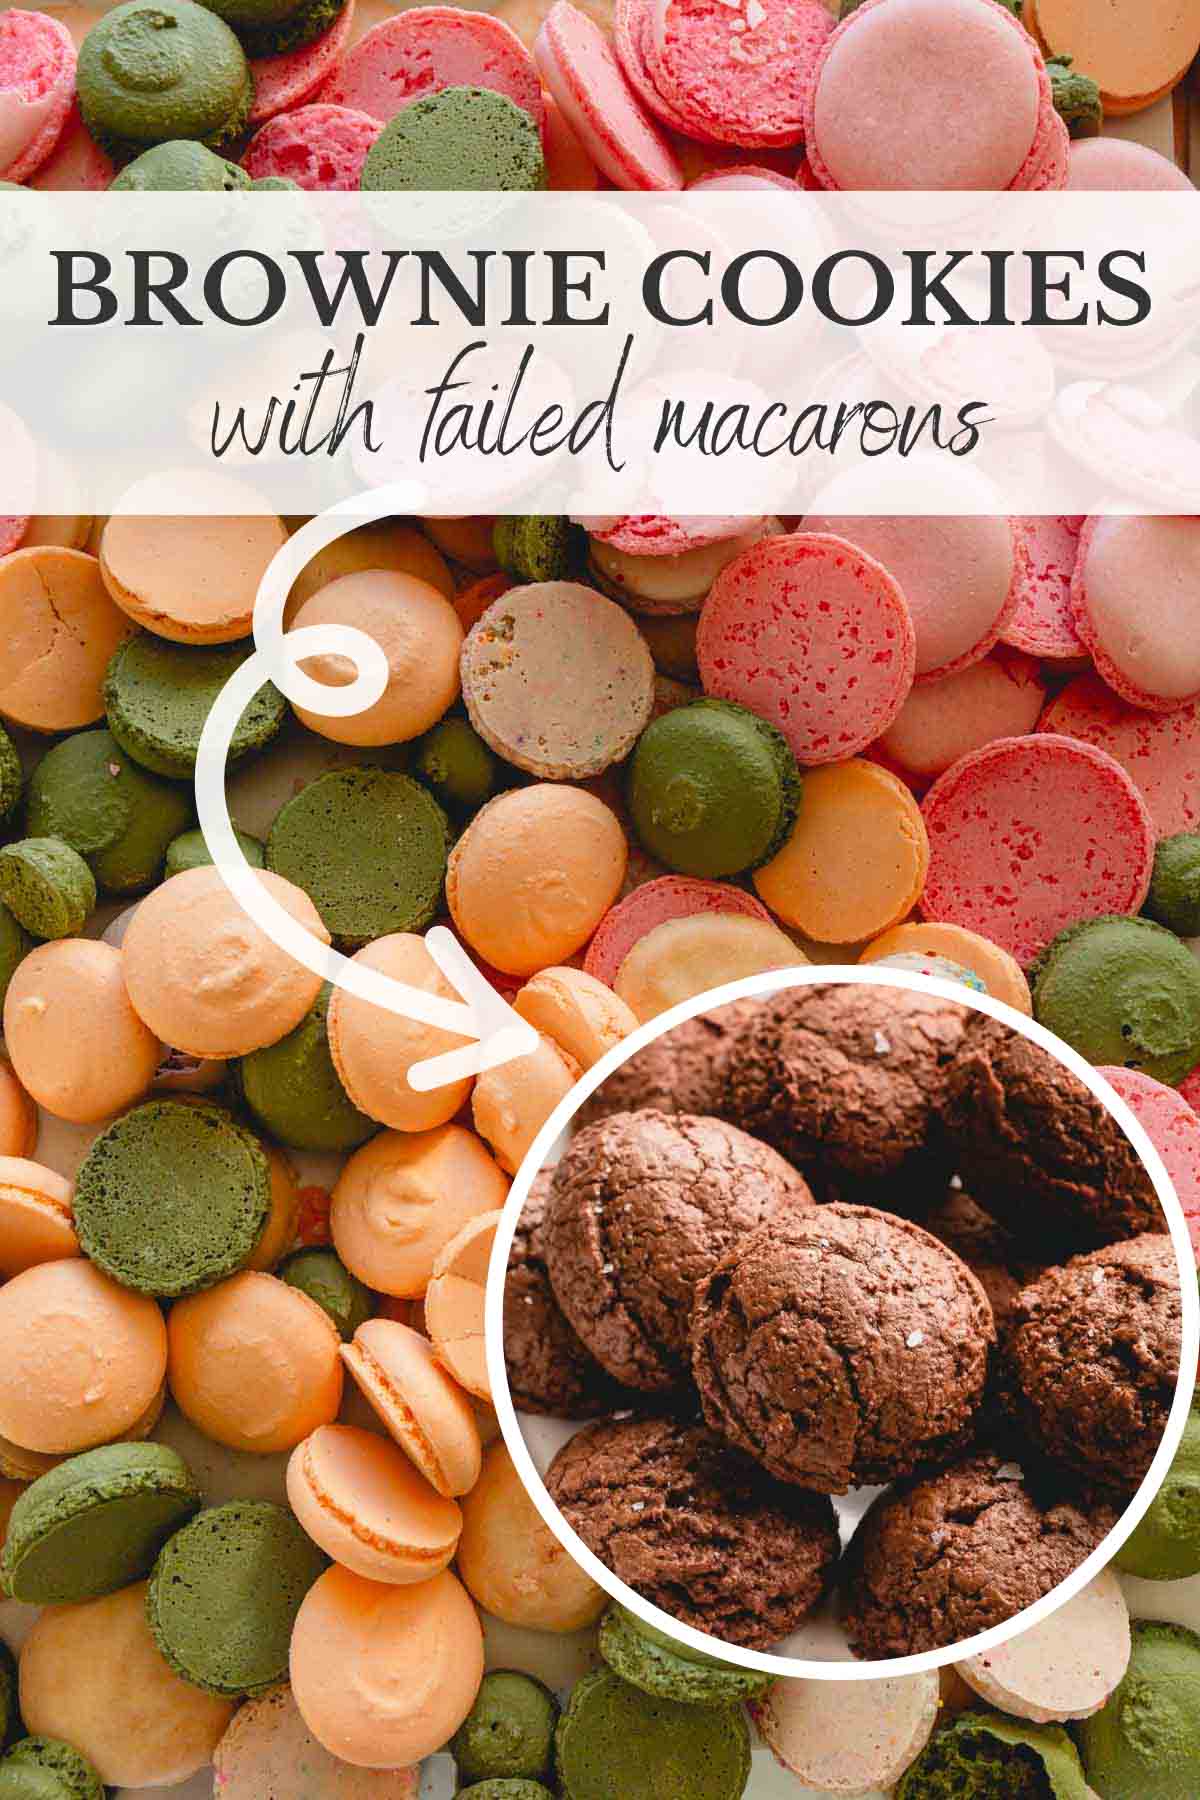 Background of failed colorful macaron shells with a small image of brownie cookies.